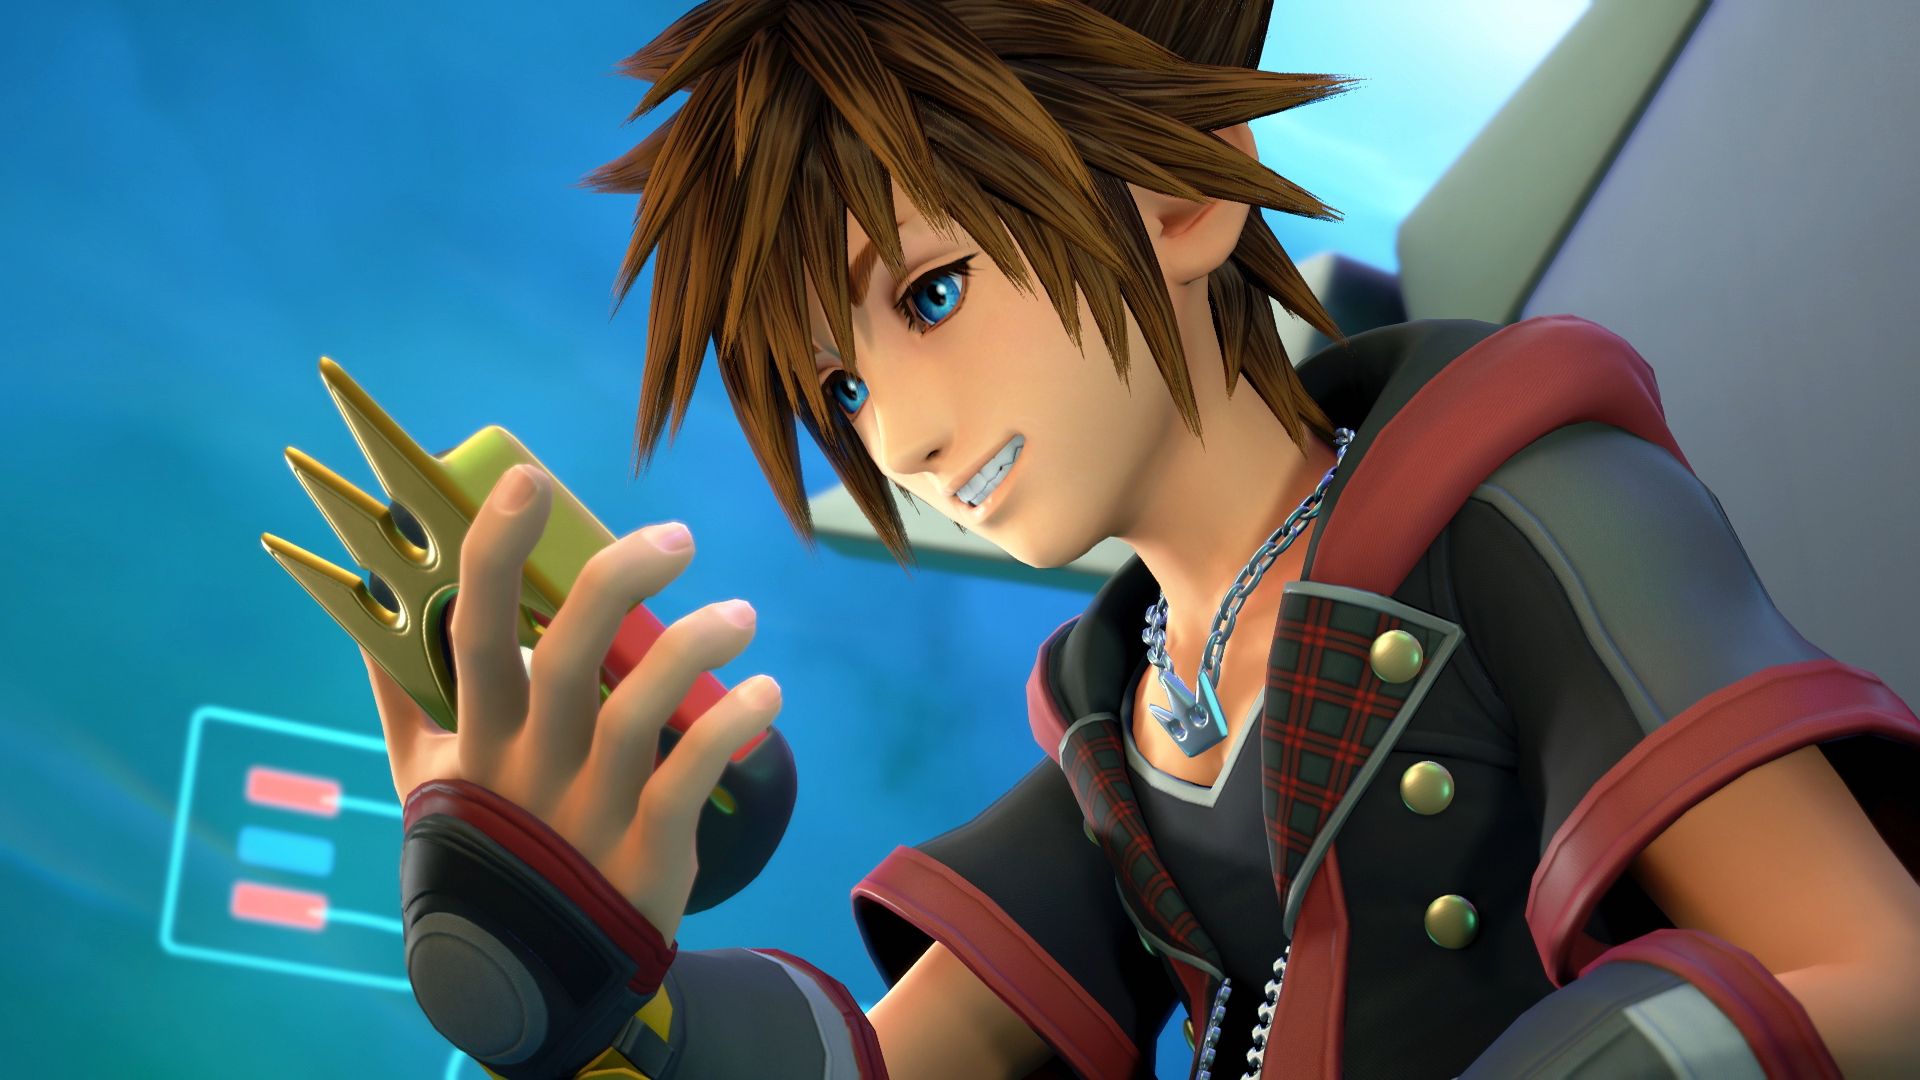 Kingdom Hearts Kingdom Hearts Iii Sora Kingdom Hearts Video Game 1920x1080